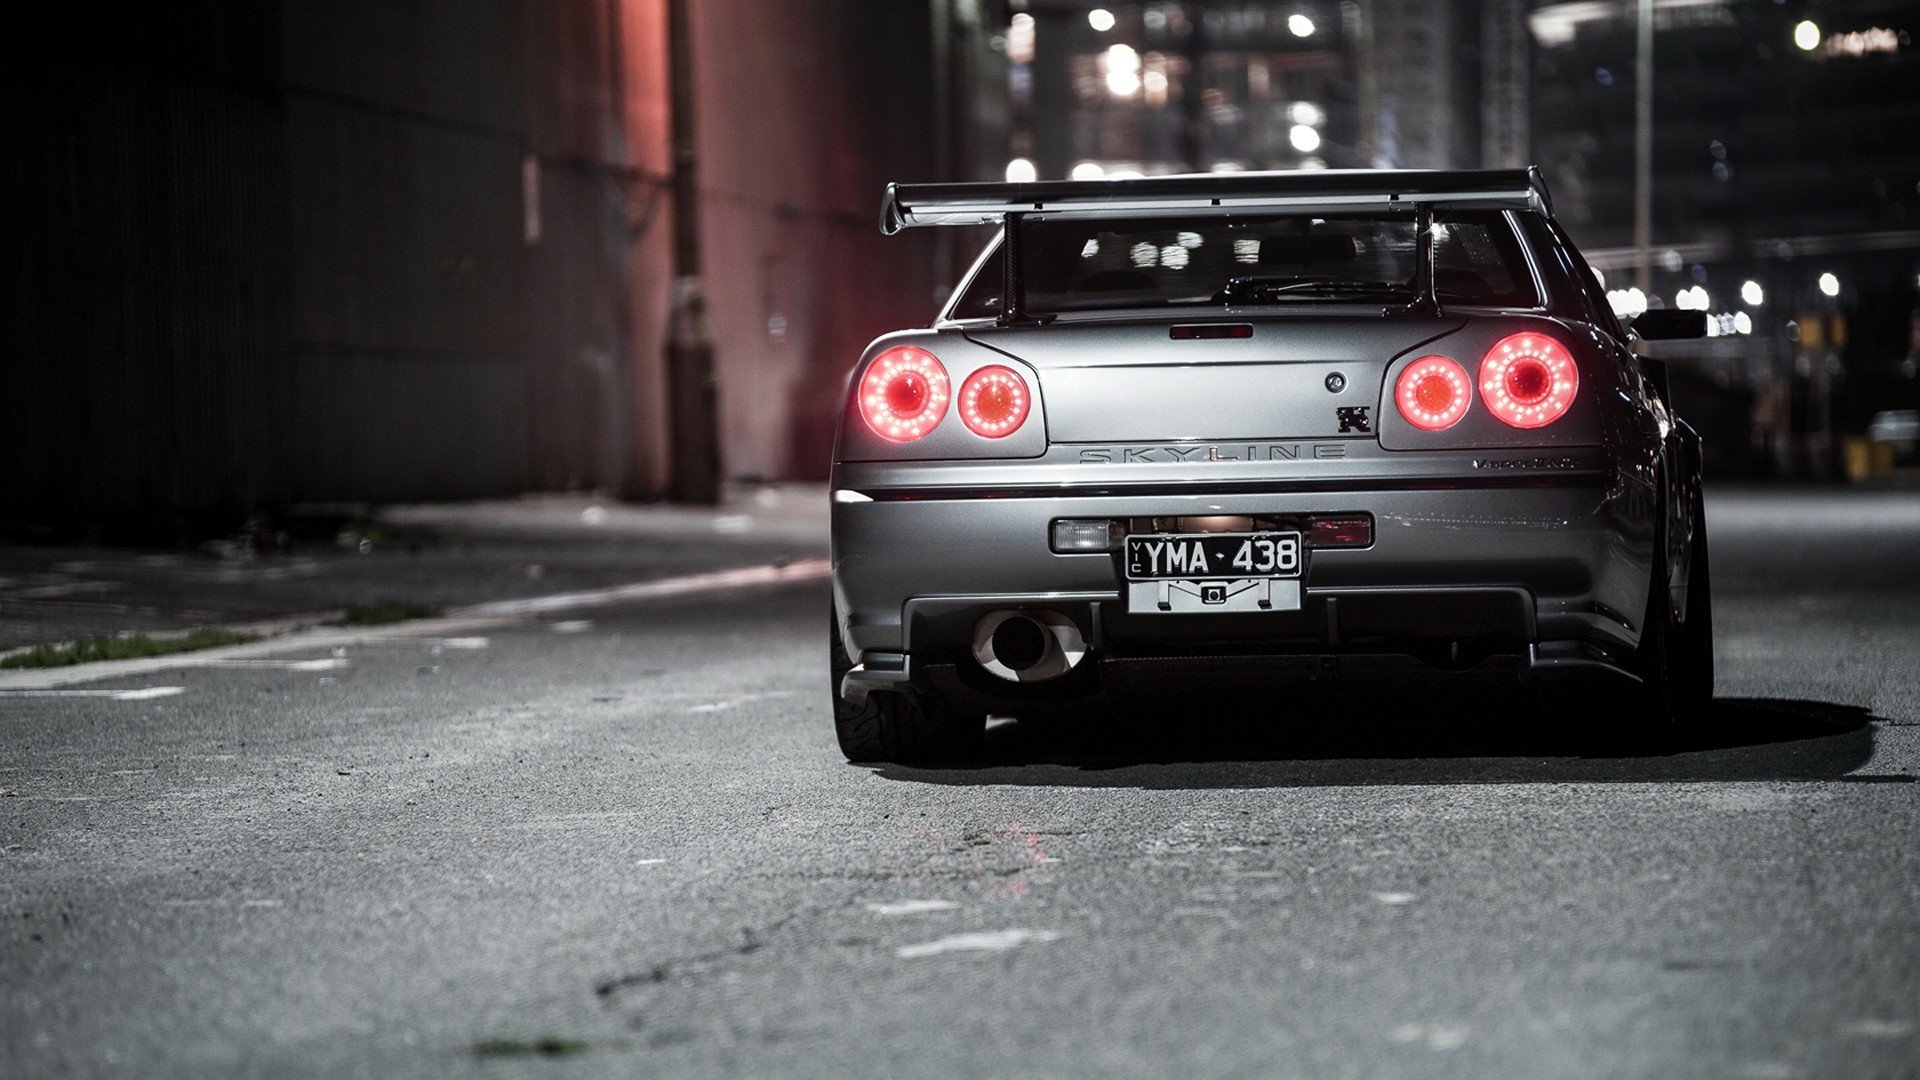 11 Nissan Skyline R34 Hd Wallpapers Background Images